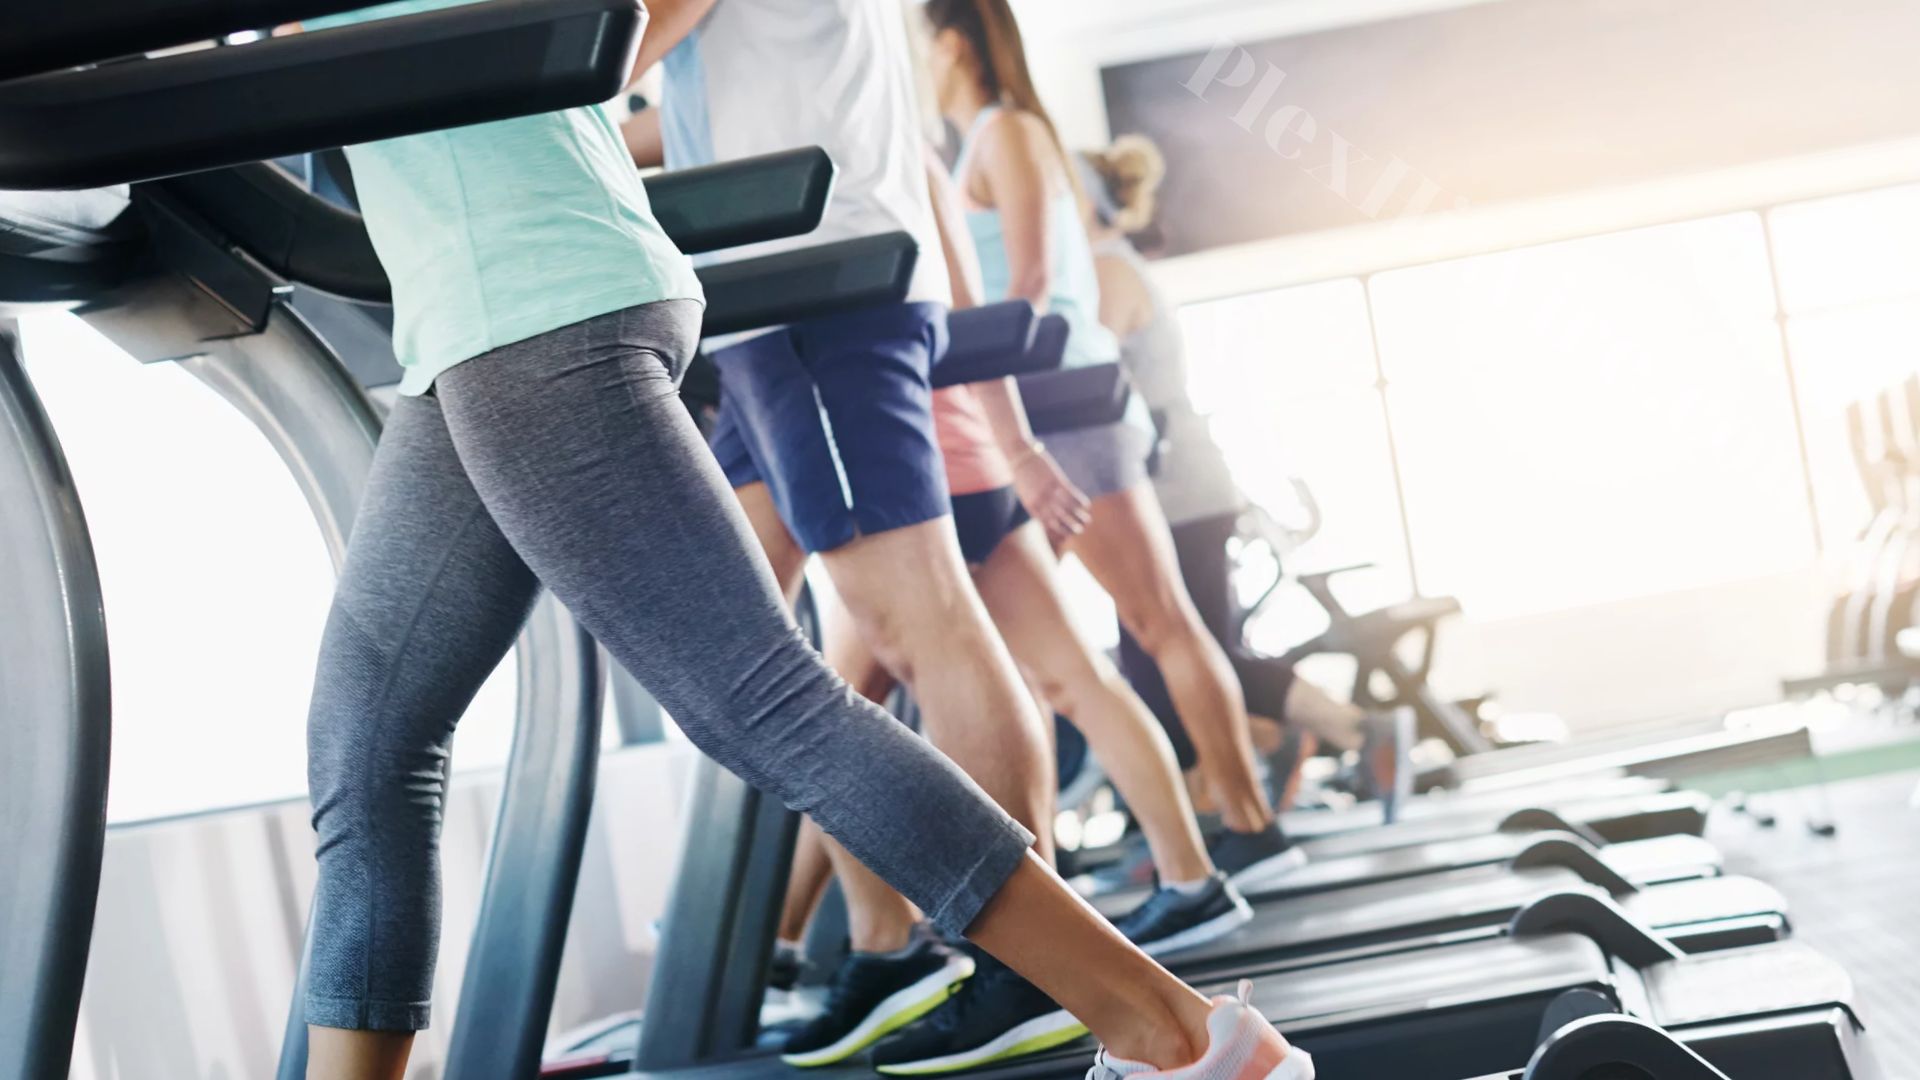 What Happens if You Don't Lubricate a Treadmill?